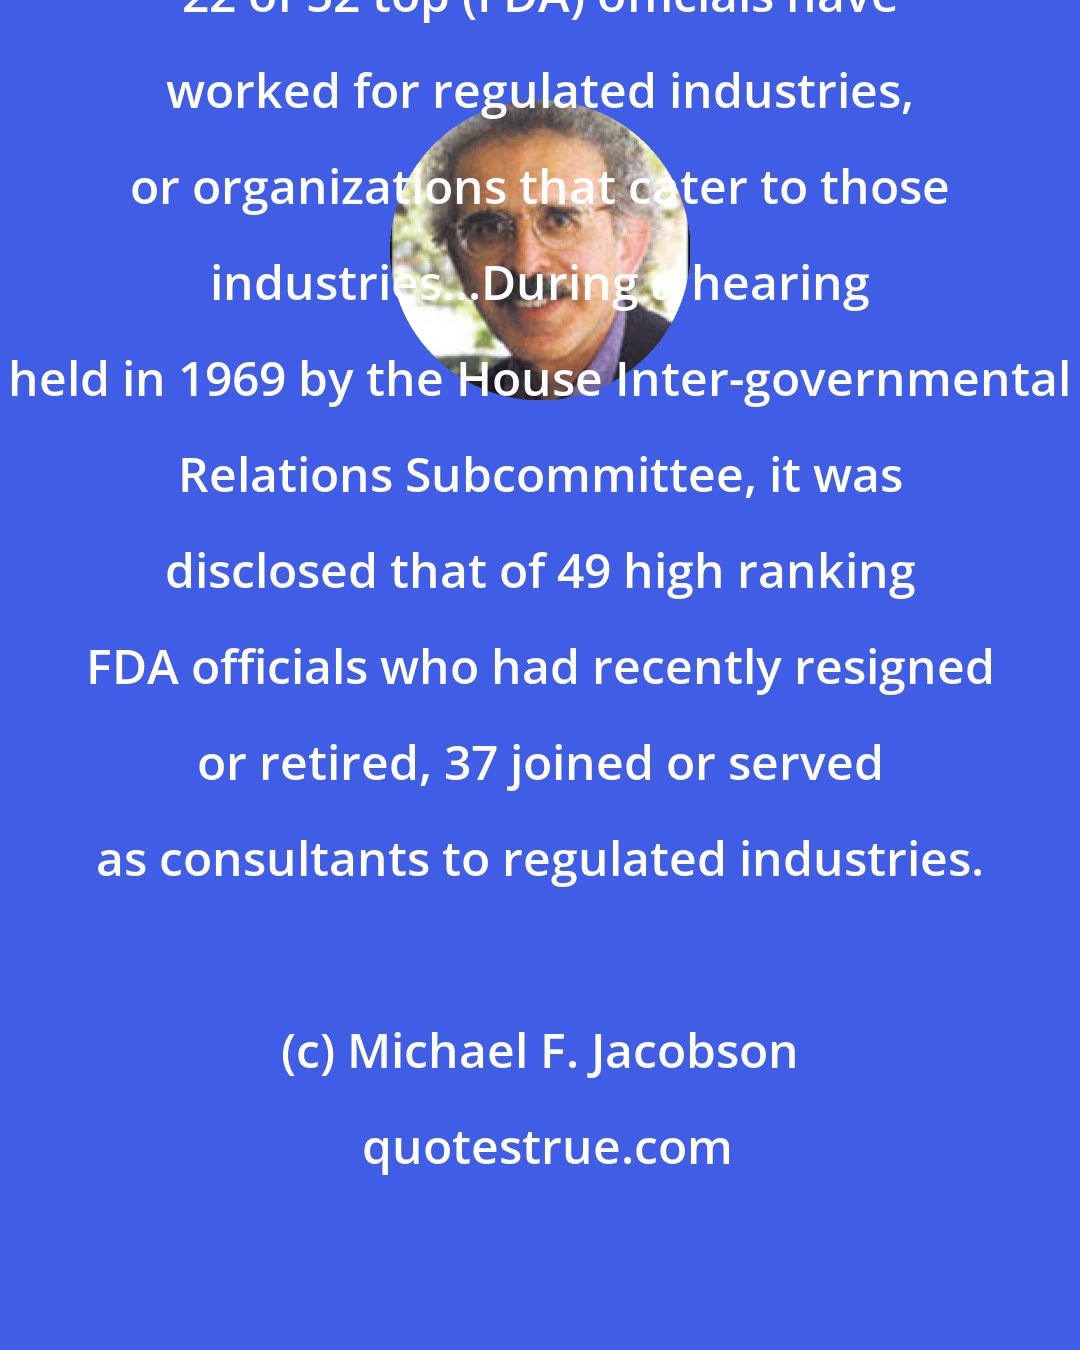 Michael F. Jacobson: 22 of 52 top (FDA) officials have worked for regulated industries, or organizations that cater to those industries...During a hearing held in 1969 by the House Inter-governmental Relations Subcommittee, it was disclosed that of 49 high ranking FDA officials who had recently resigned or retired, 37 joined or served as consultants to regulated industries.